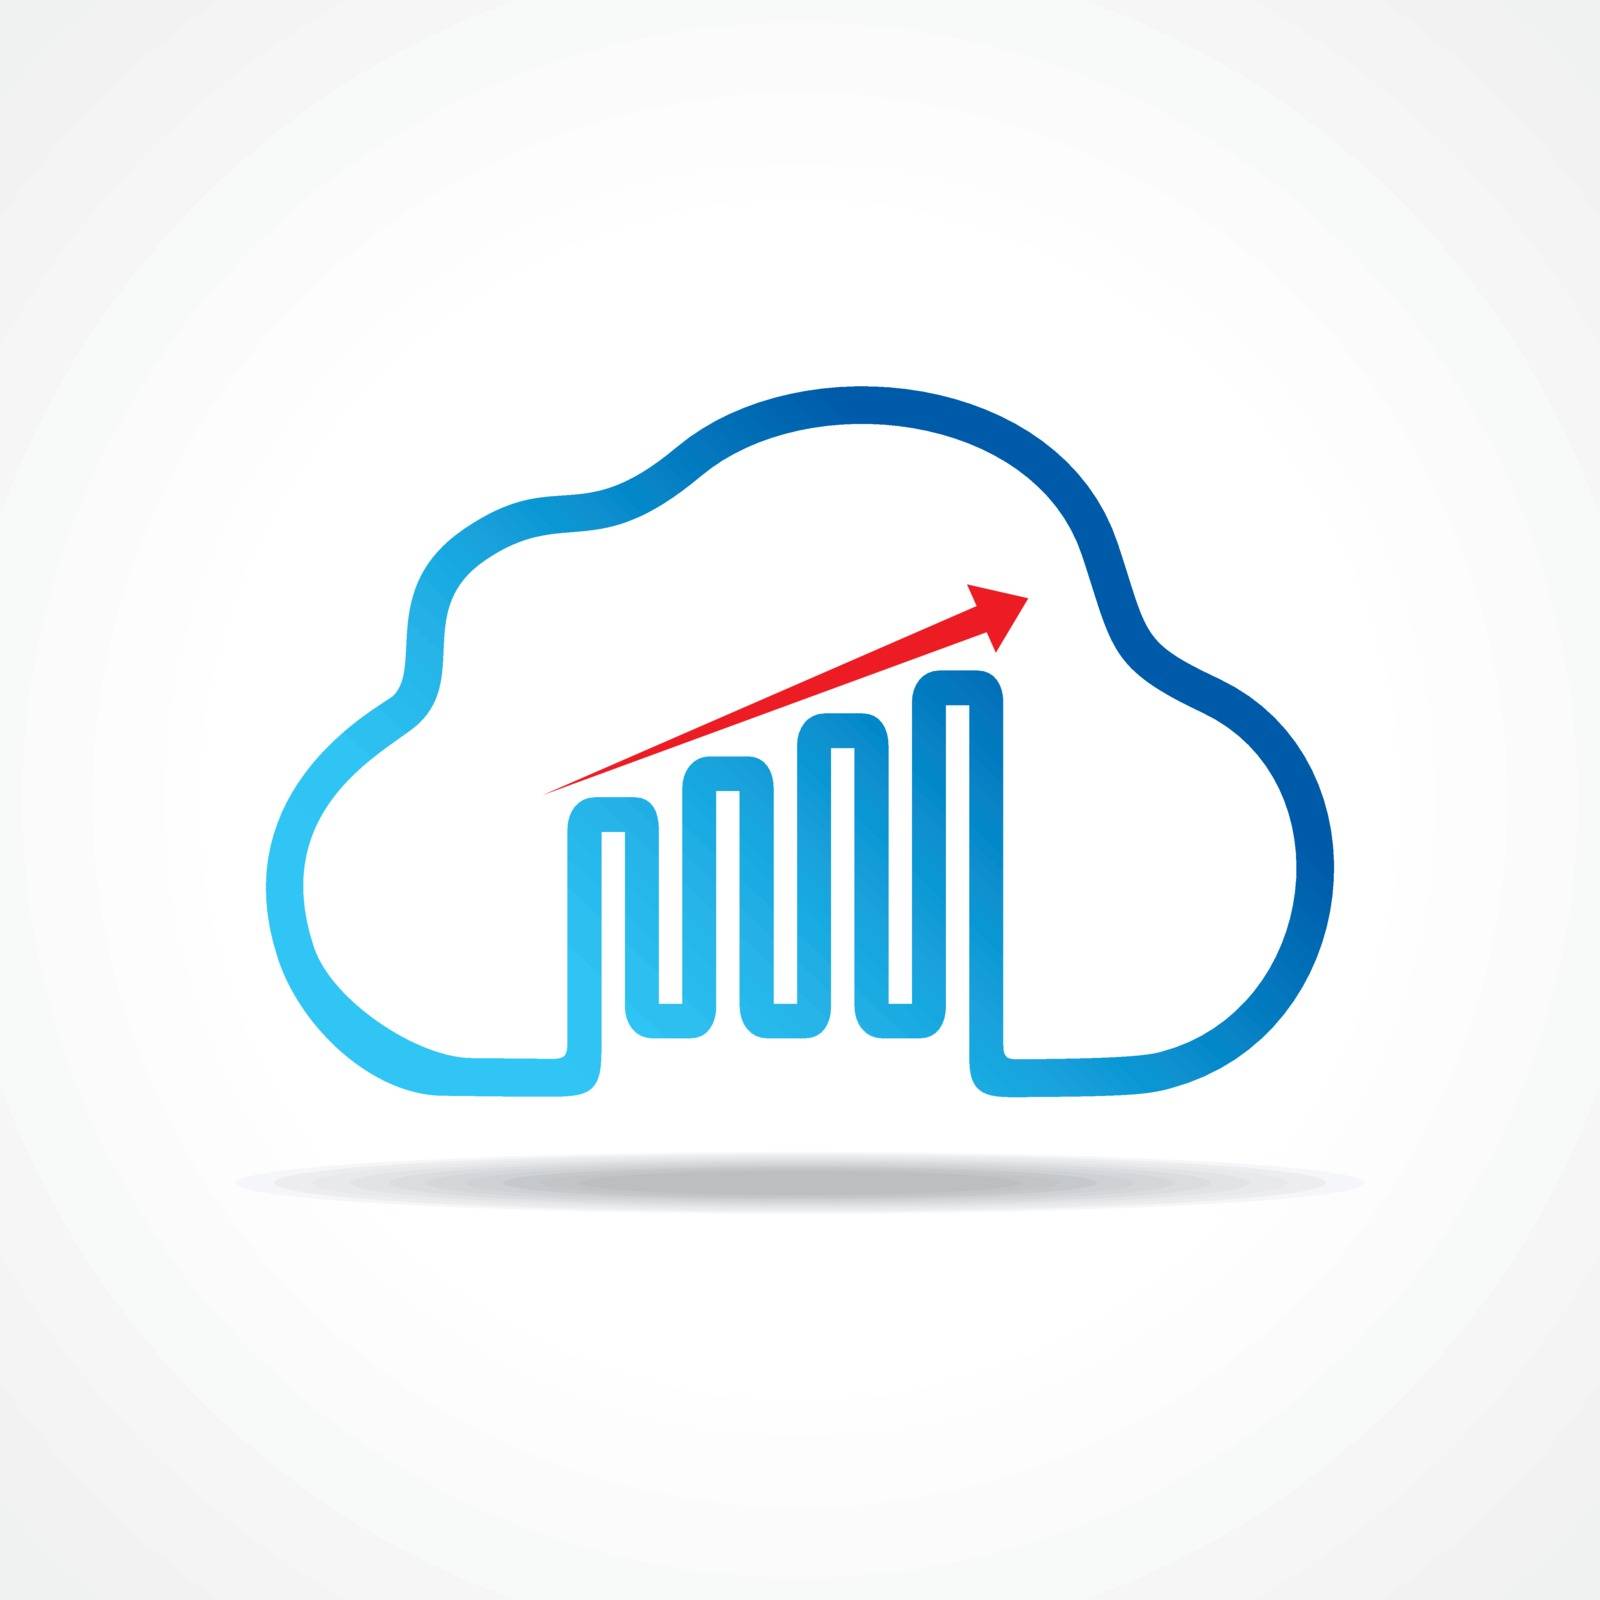 business growth graph design with cloud design concept vector by graphicsdunia4you